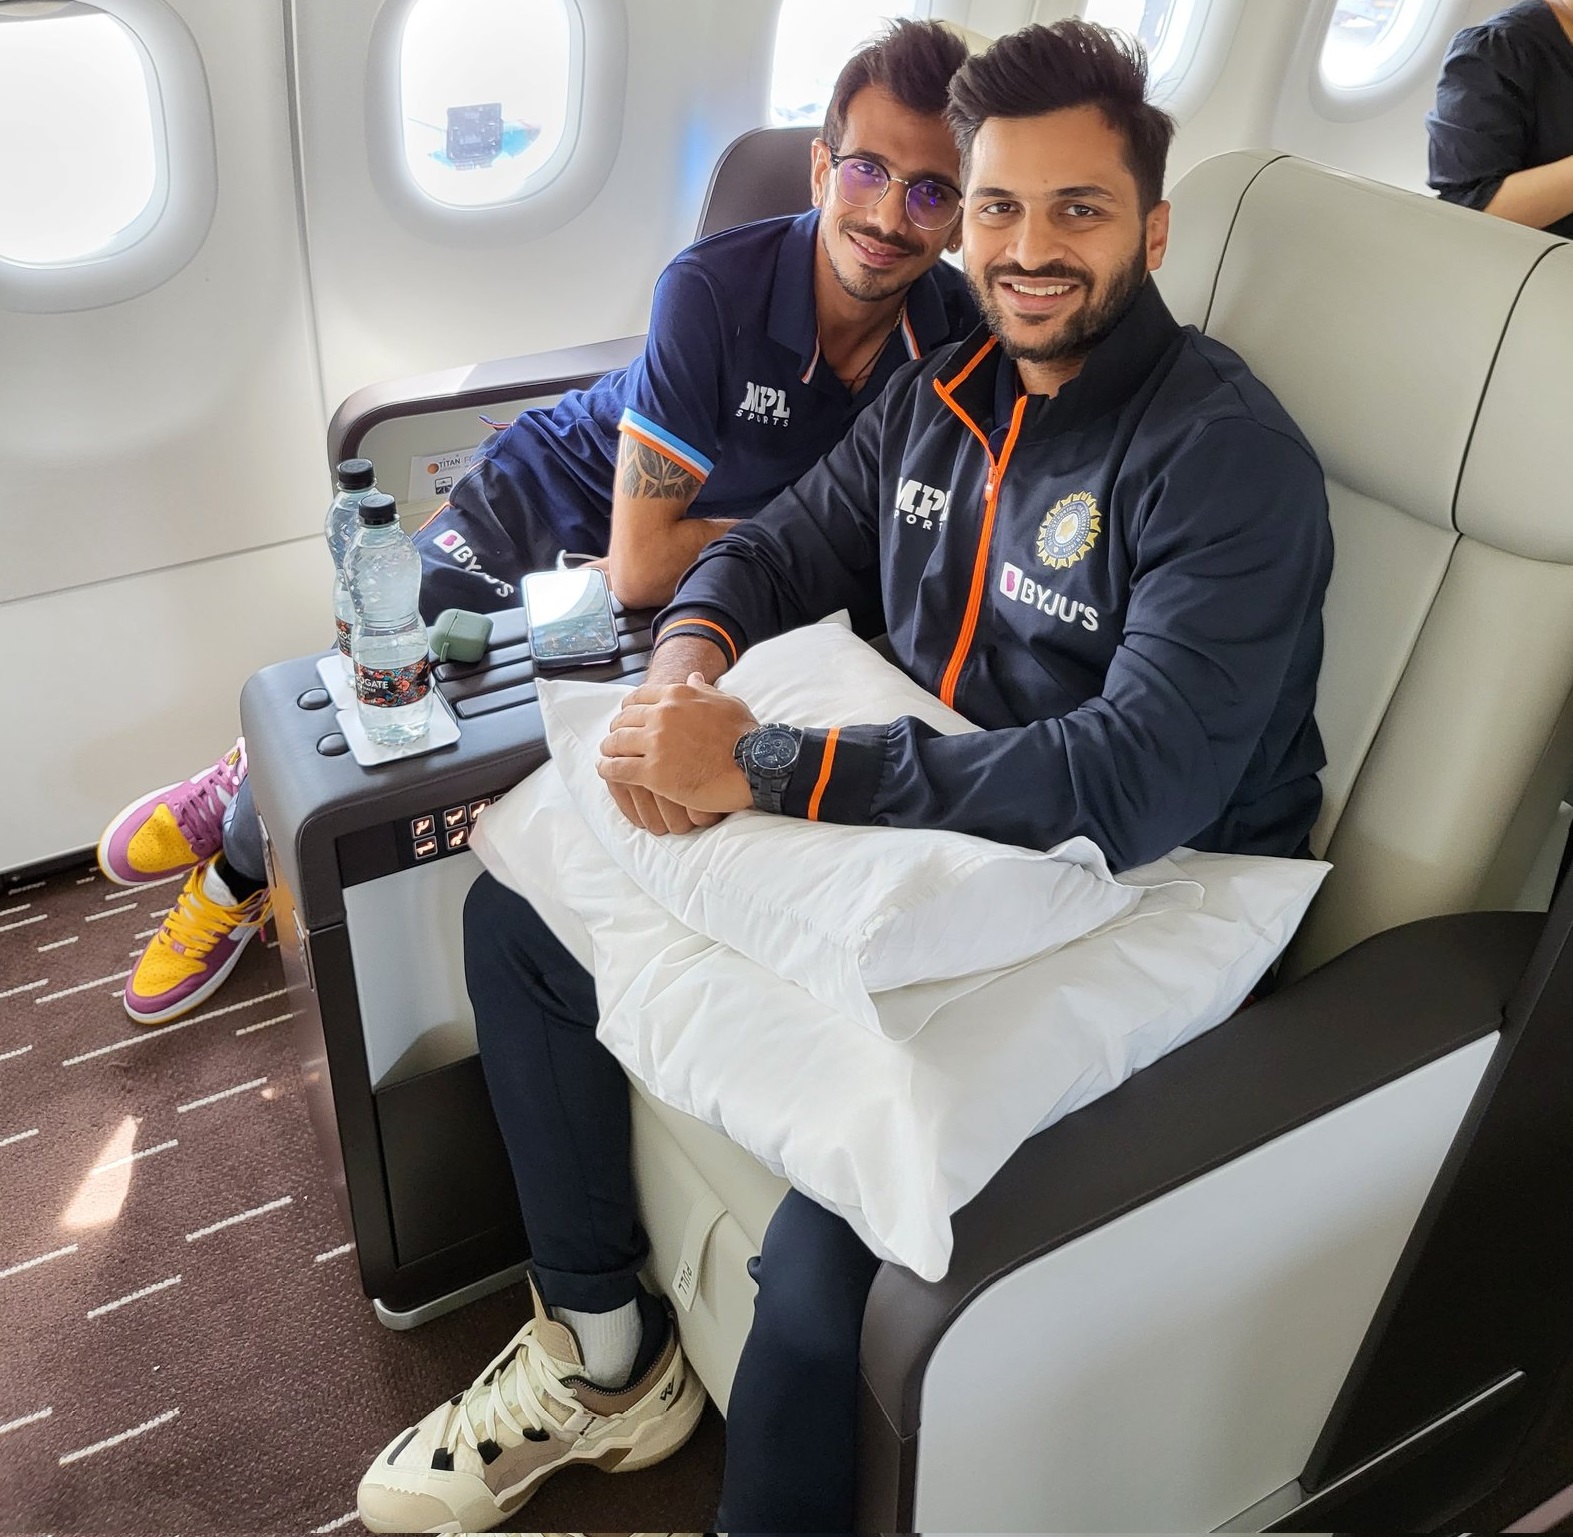 India Tour Of West Indies: Team India Reaches Caribbean By Charter Flight, Short Holiday For Rohit Sharma: Follow Live Updates